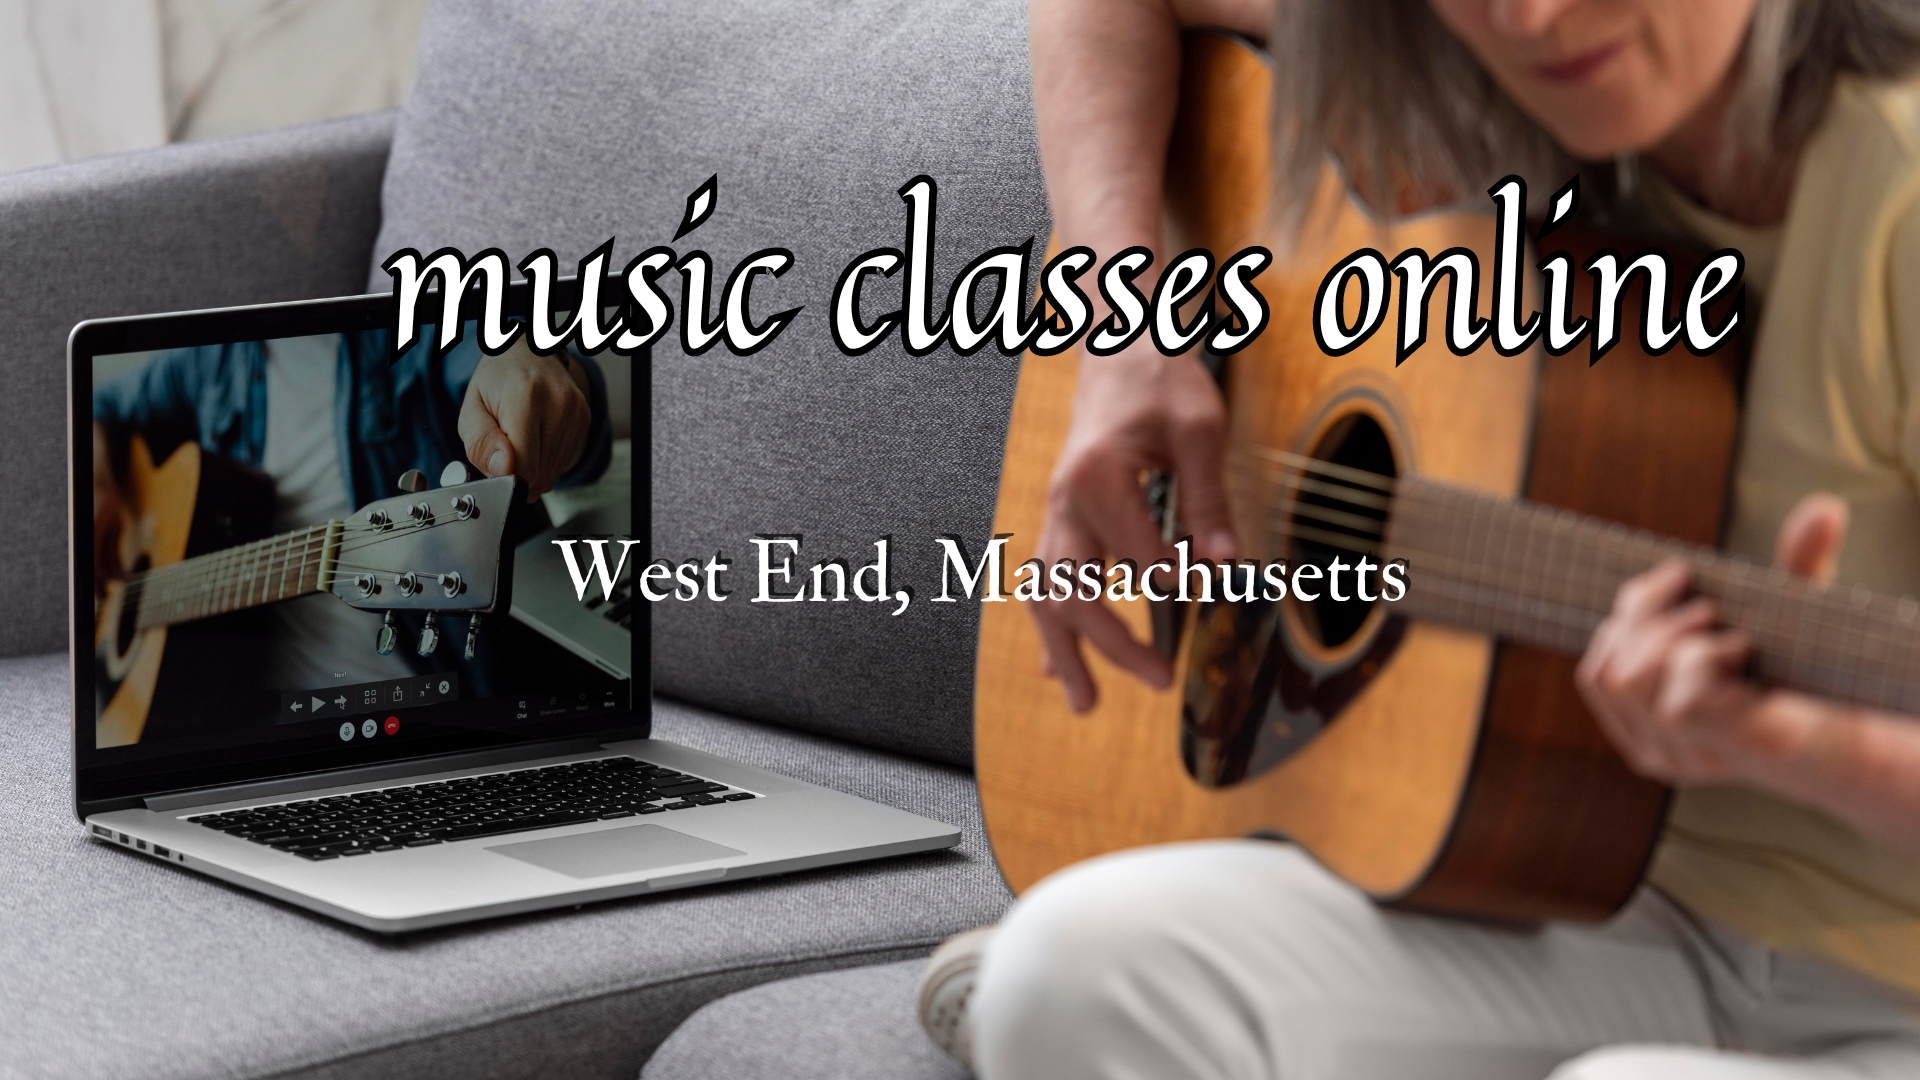 Discover the Benefits of Online Music Classes in West End, Massachusetts